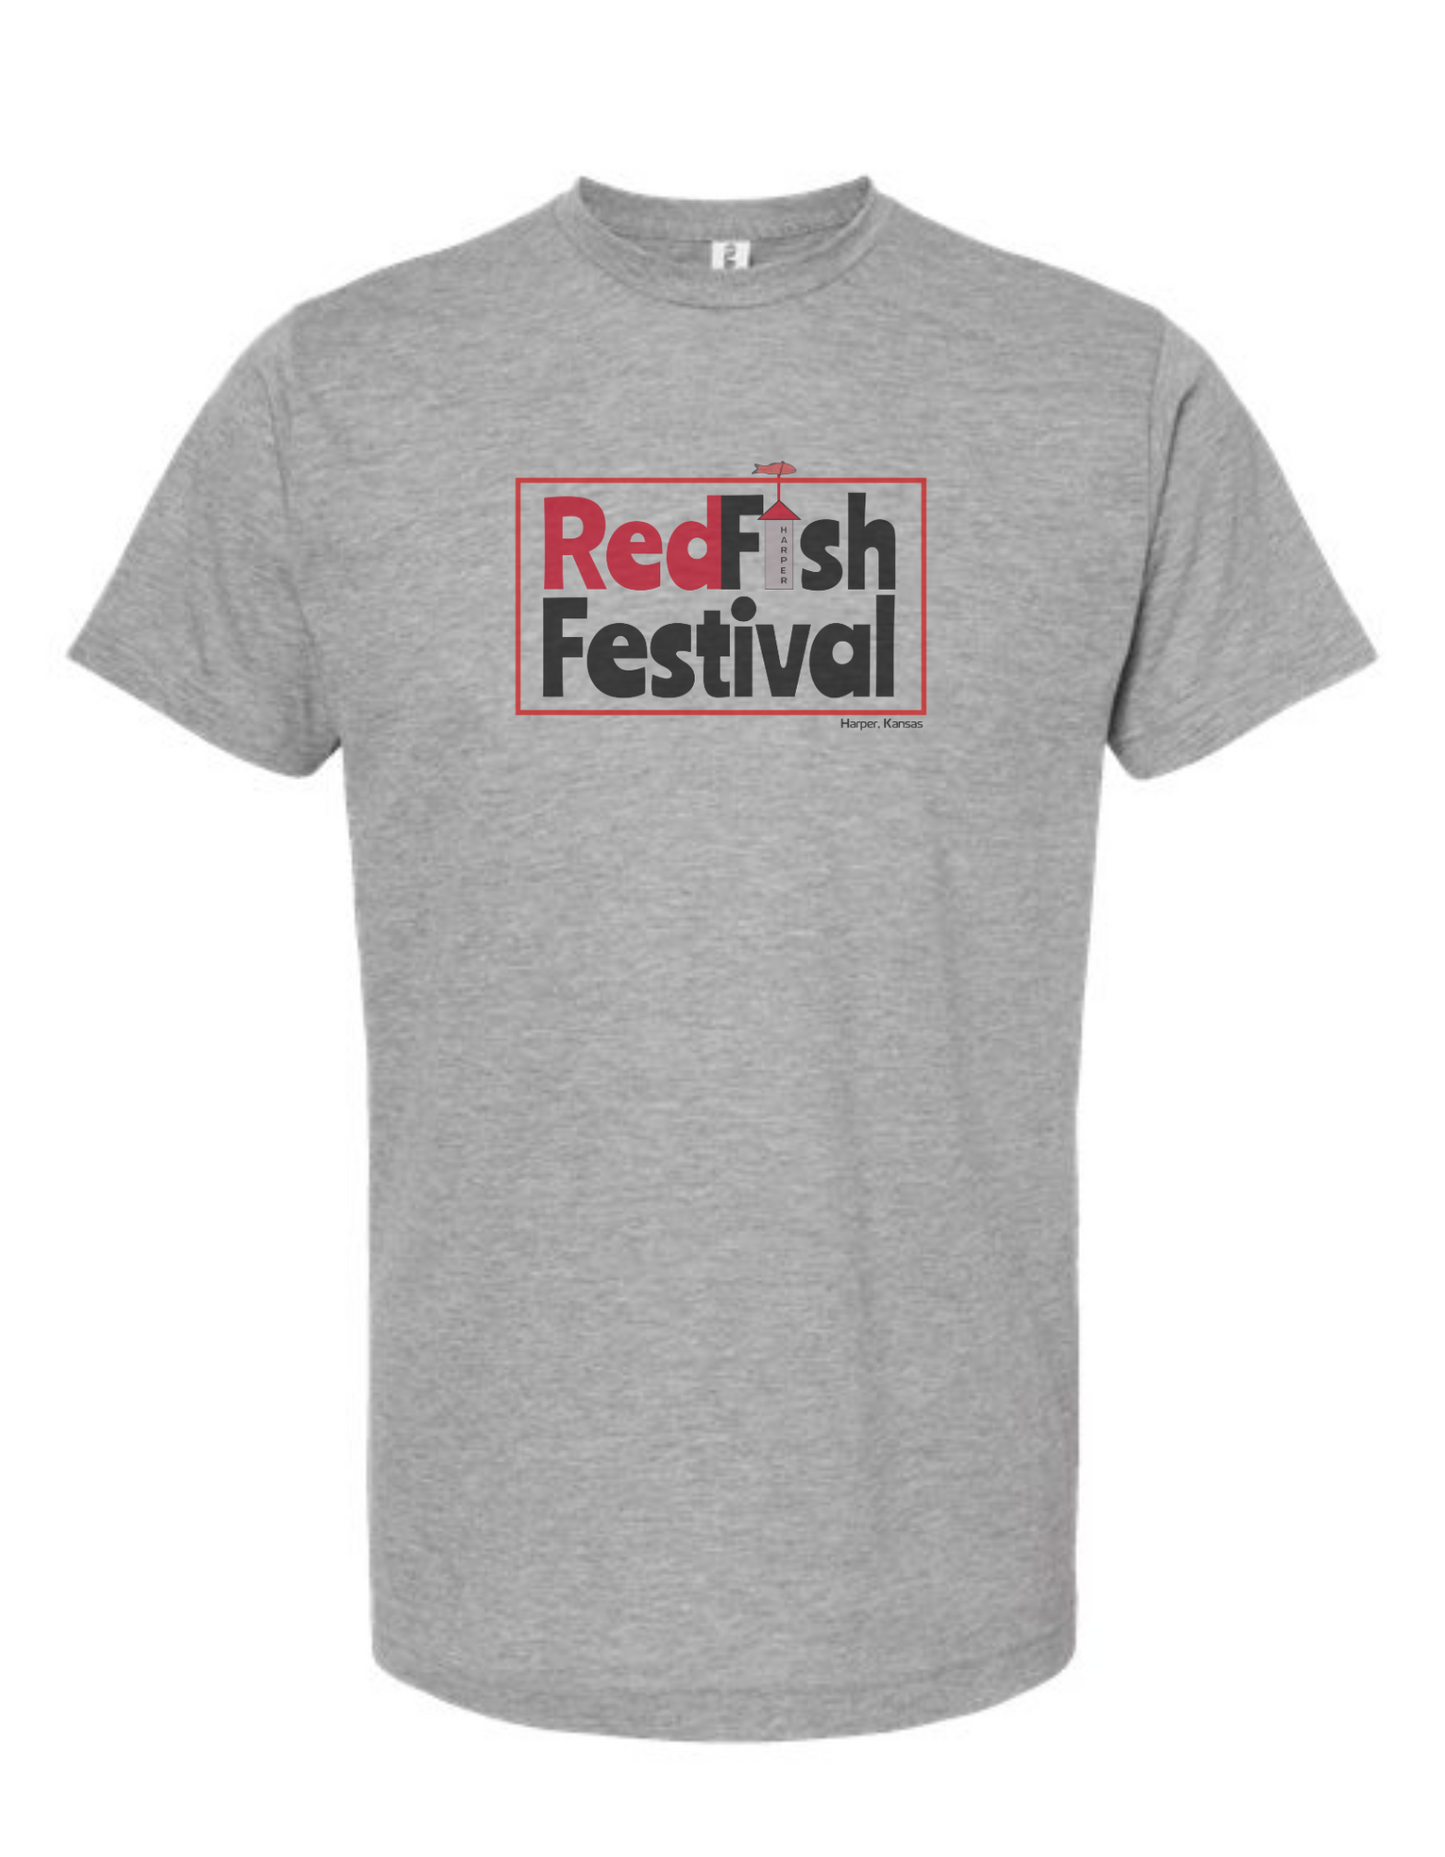 Red Fish Festival, heather grey; support tee